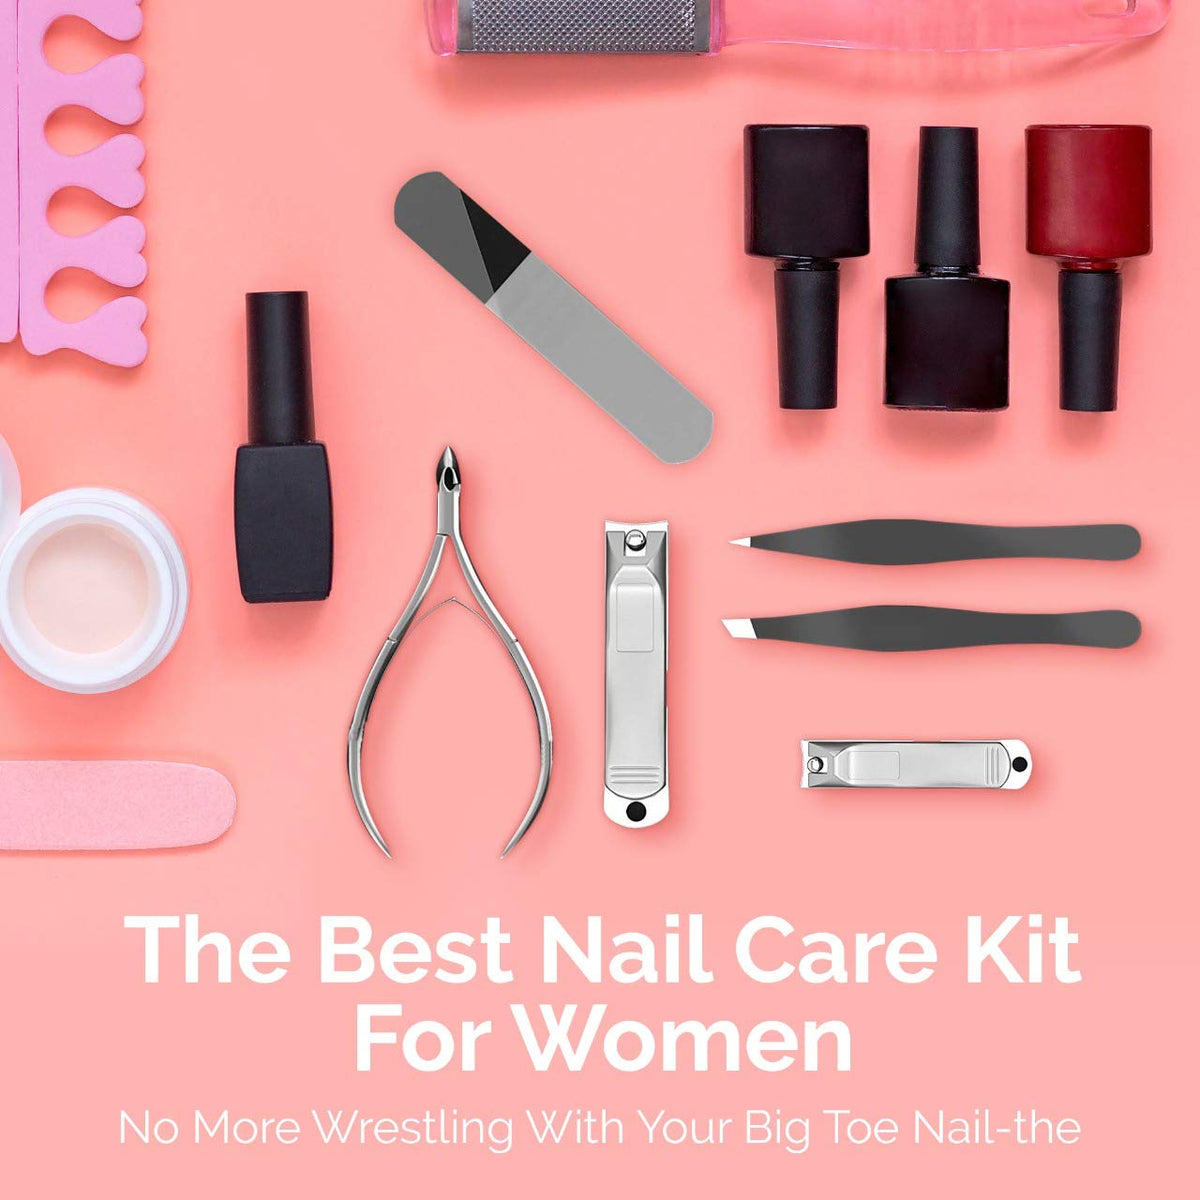 Buy Trim Beauty Care All Purpose Nail Kit Online at Low Prices in India -  Amazon.in